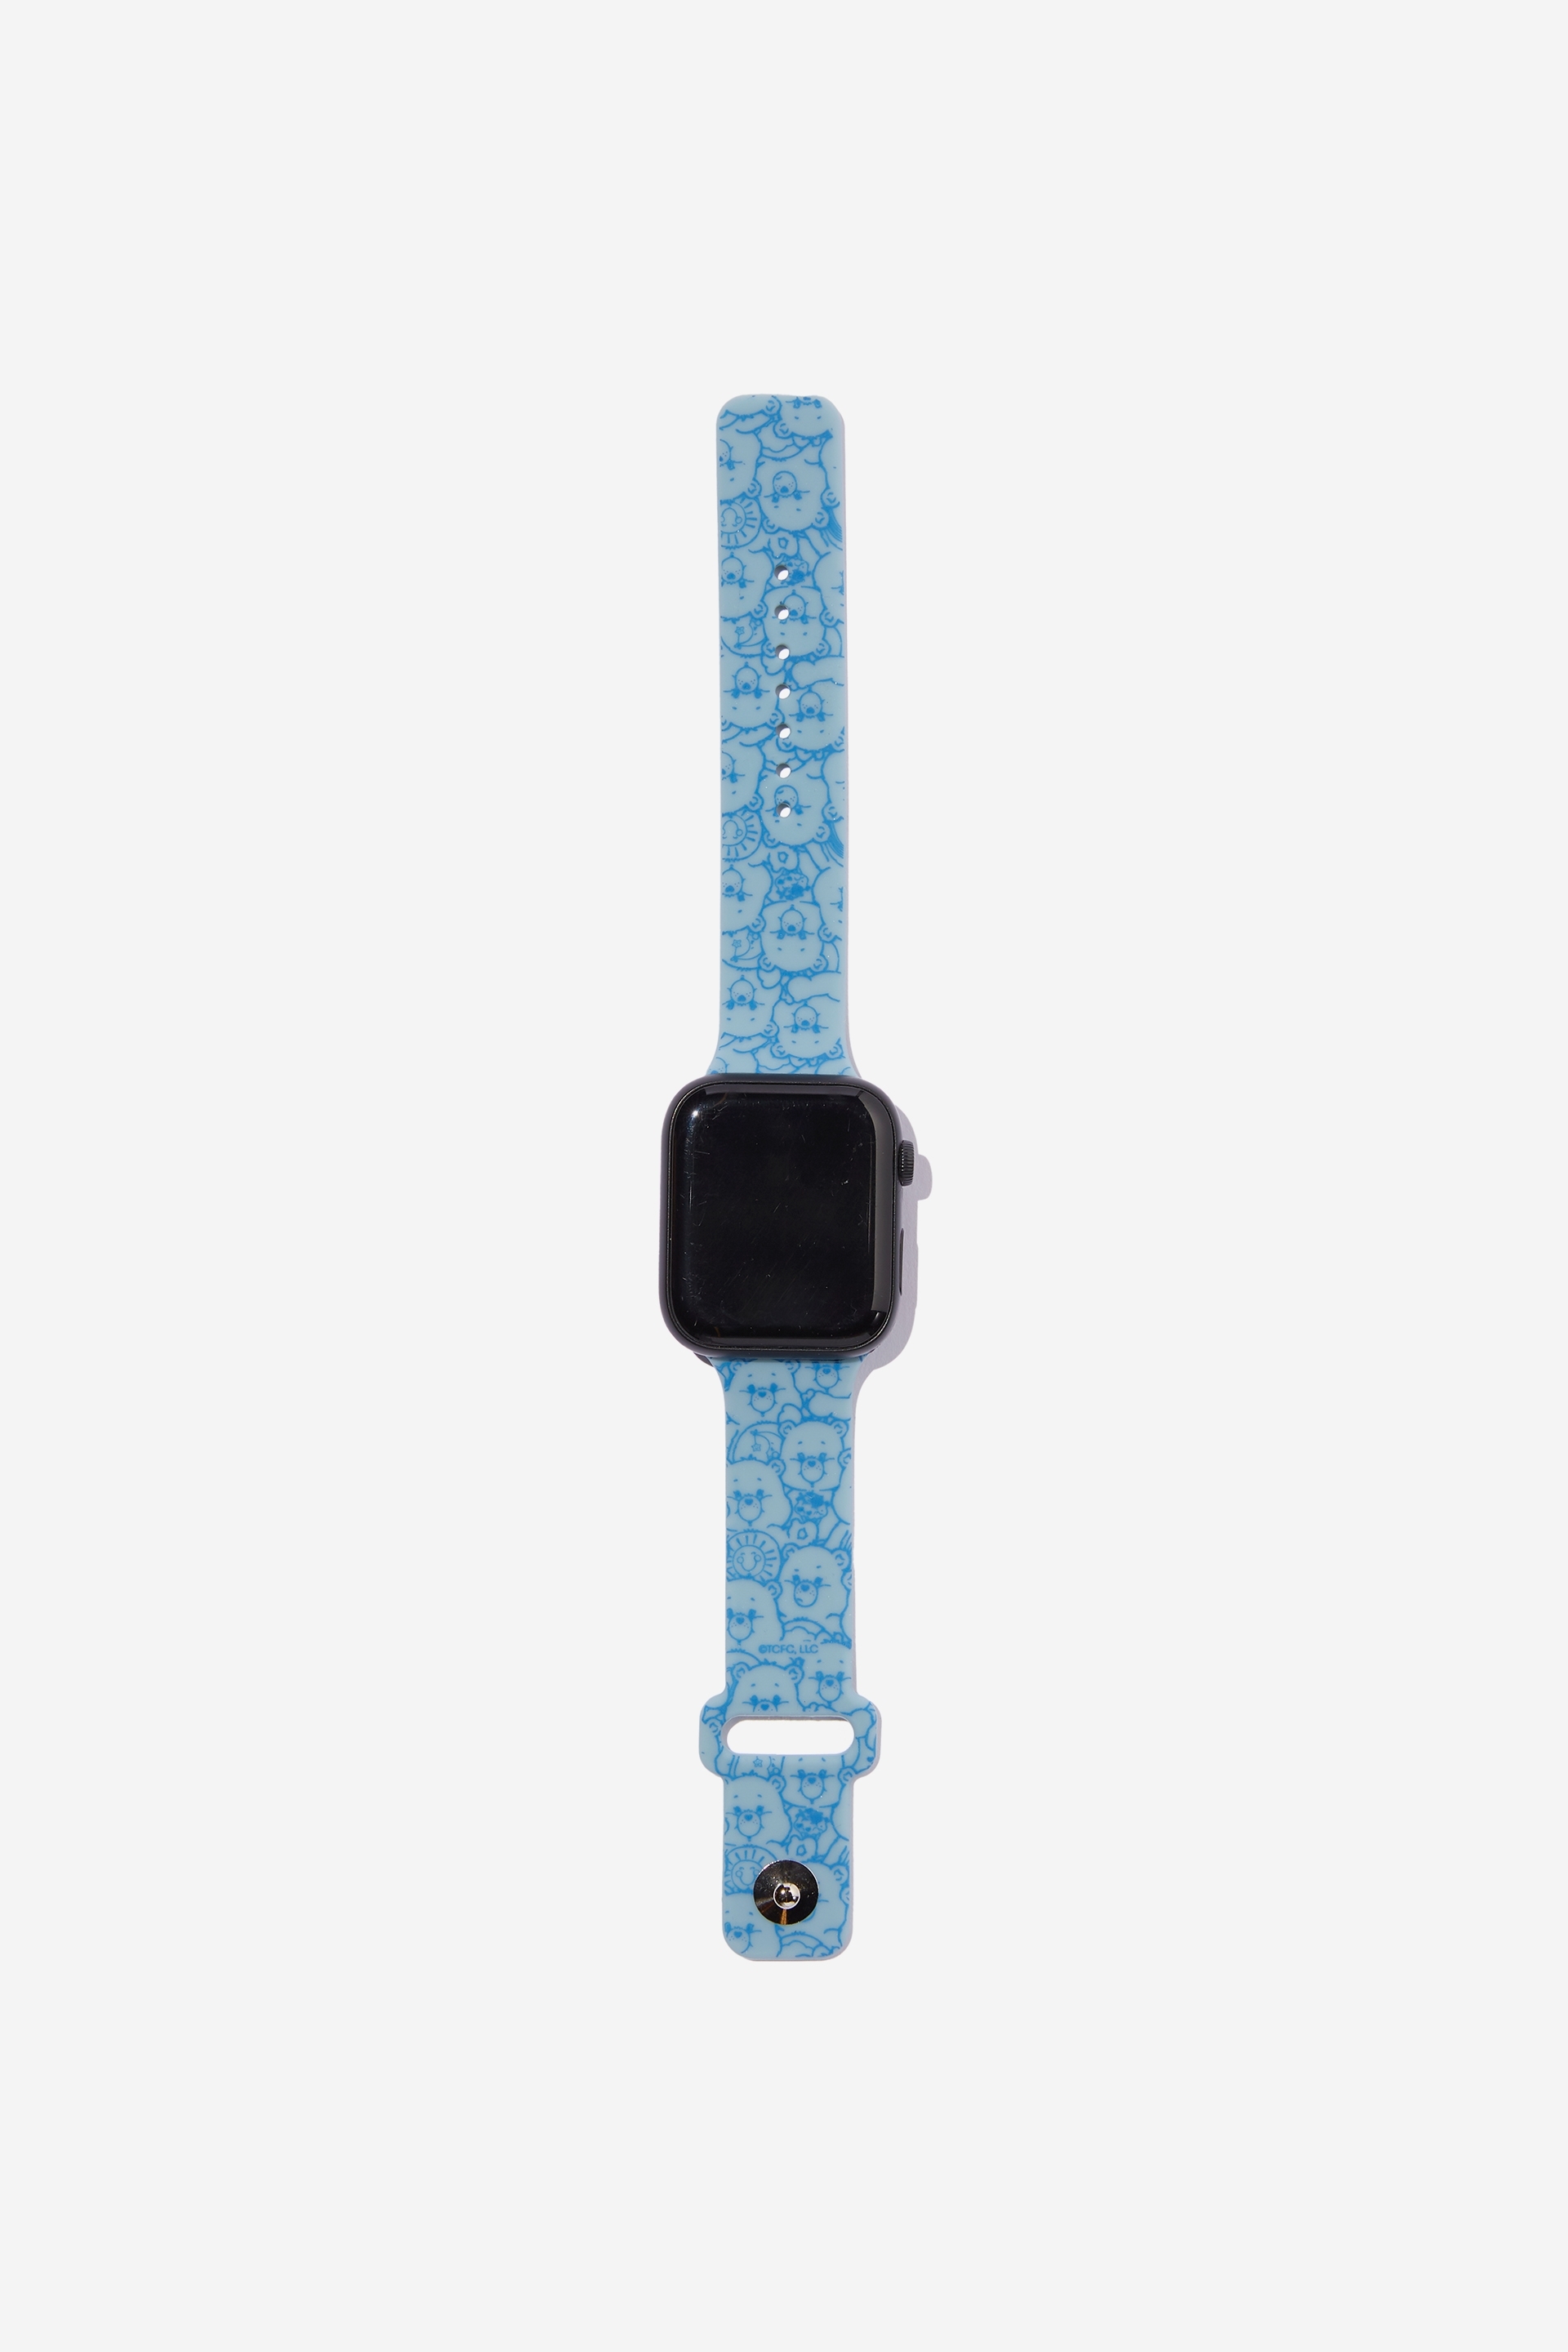 Typo - Care Bears Strapped Watch Strap - Lcn clc carebears blue